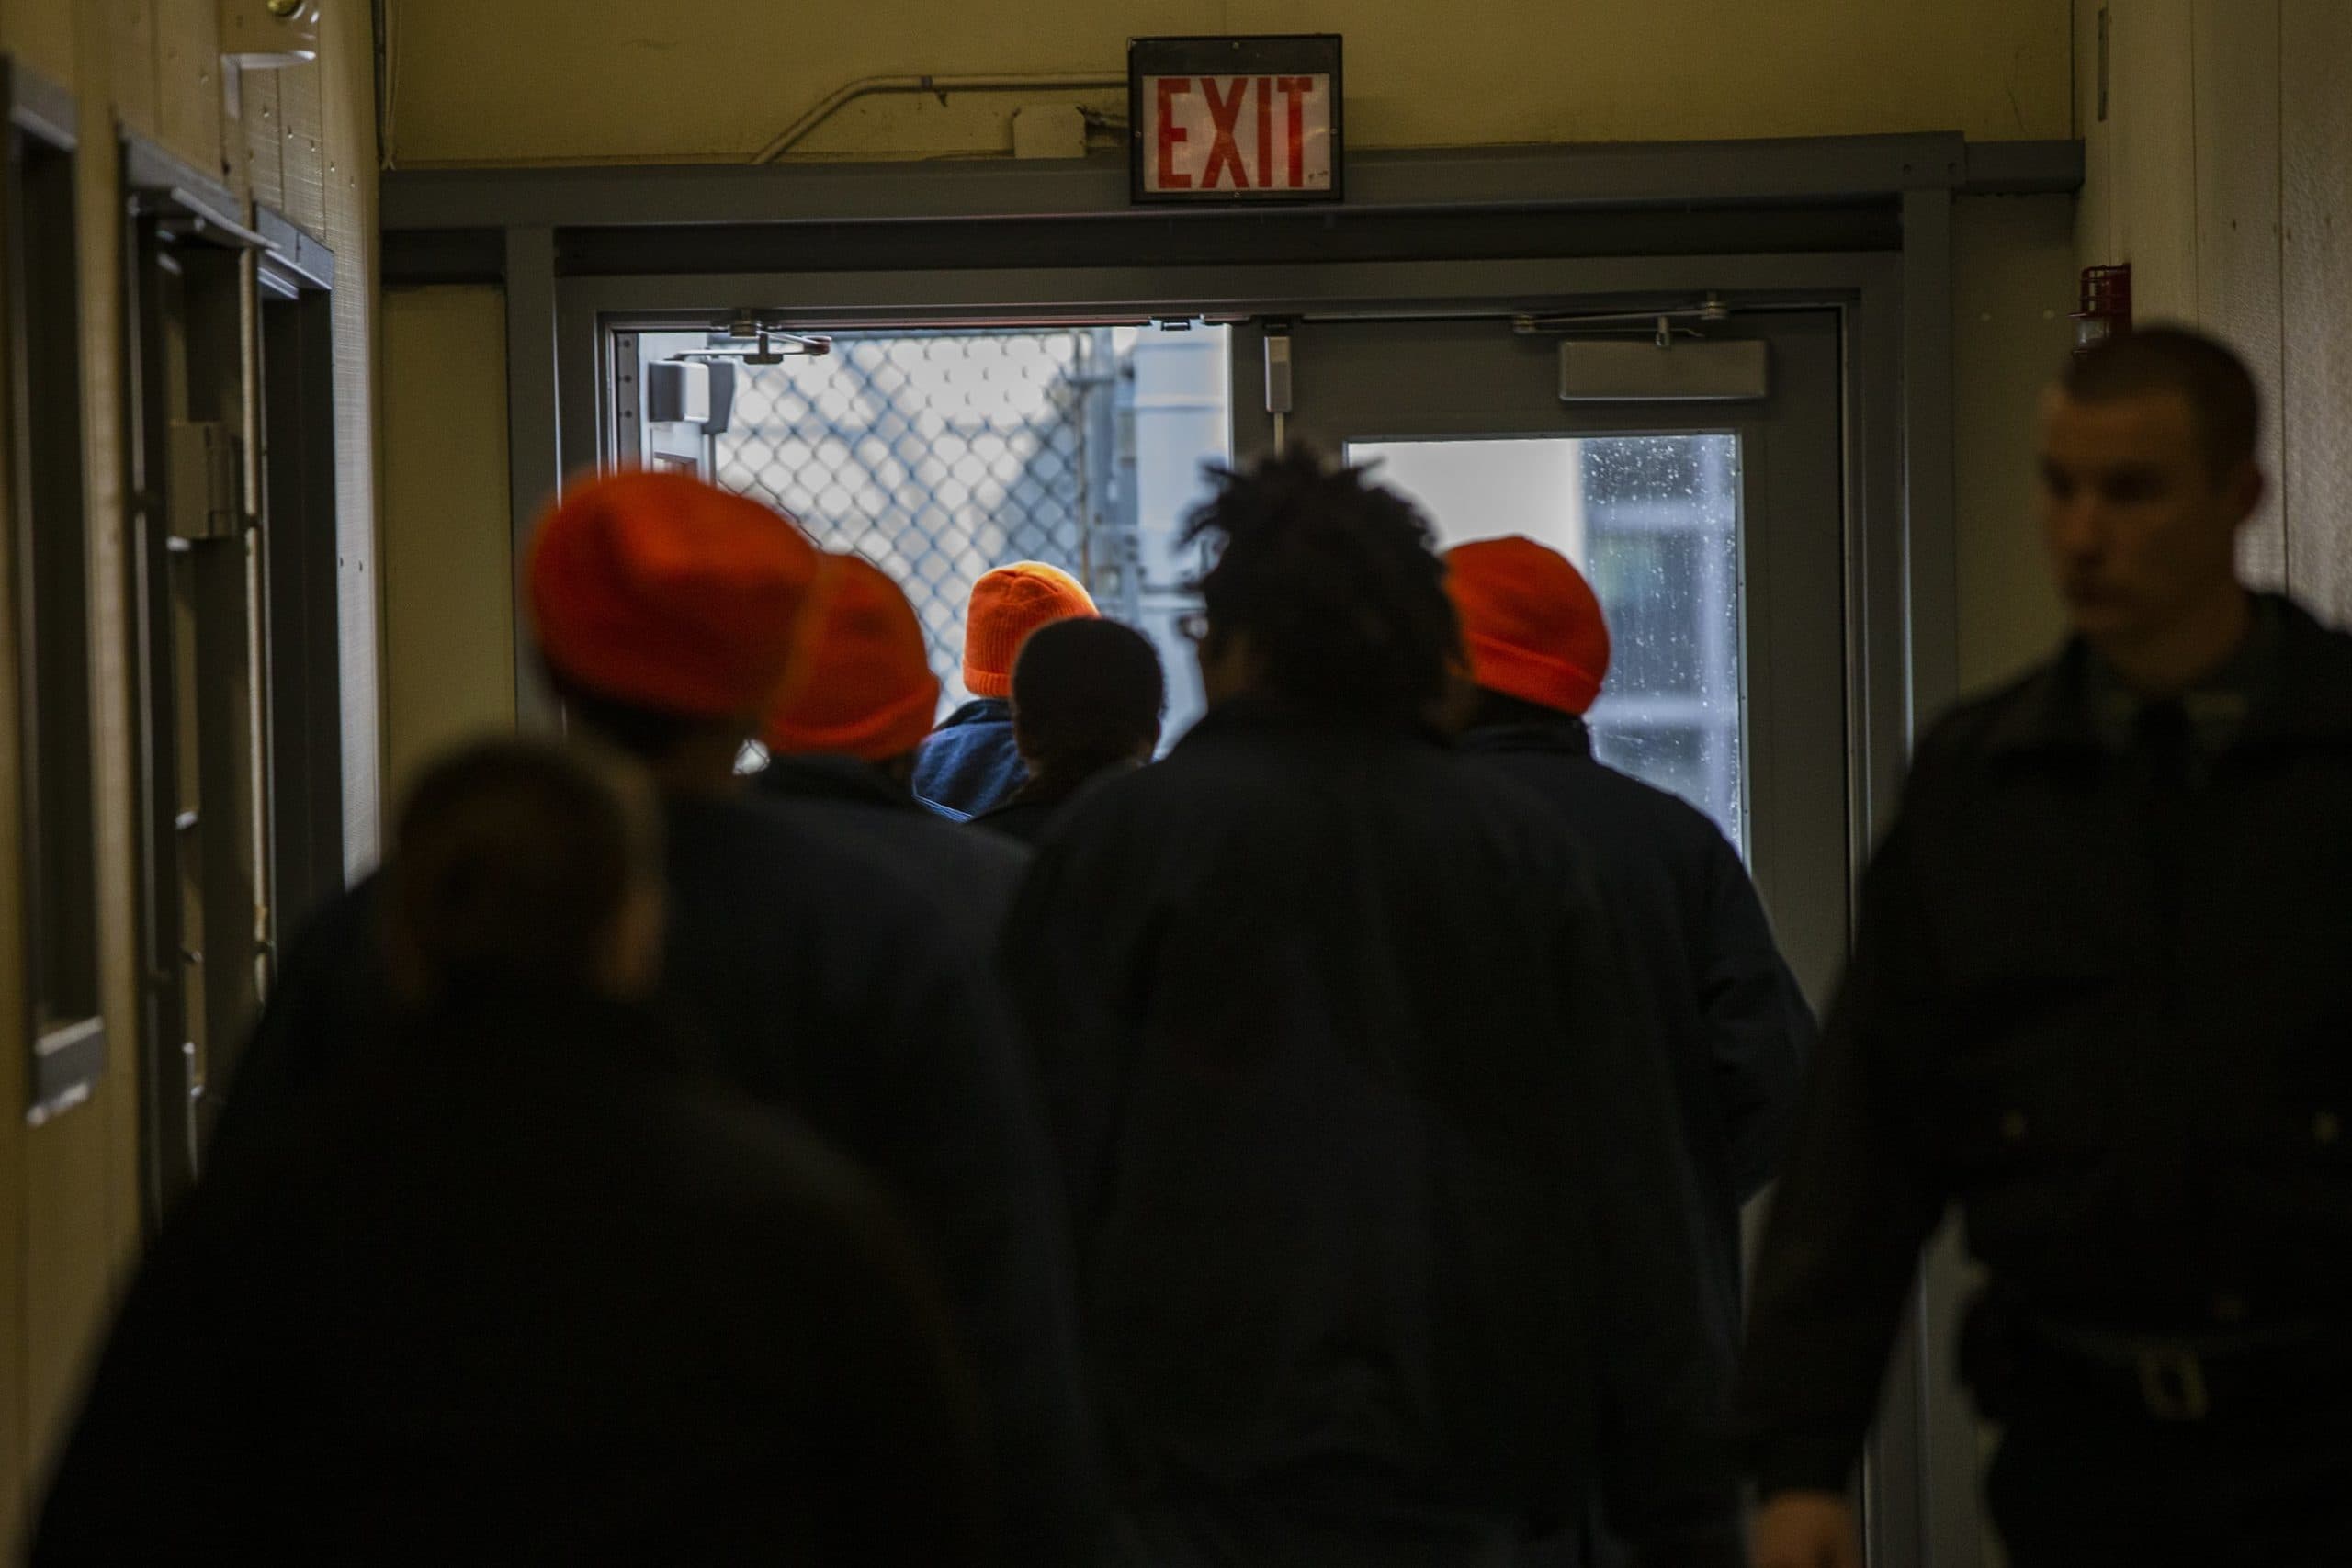 An Essex County jail corrections officer escorts inmates out of their cell block. (Jesse Costa/WBUR)